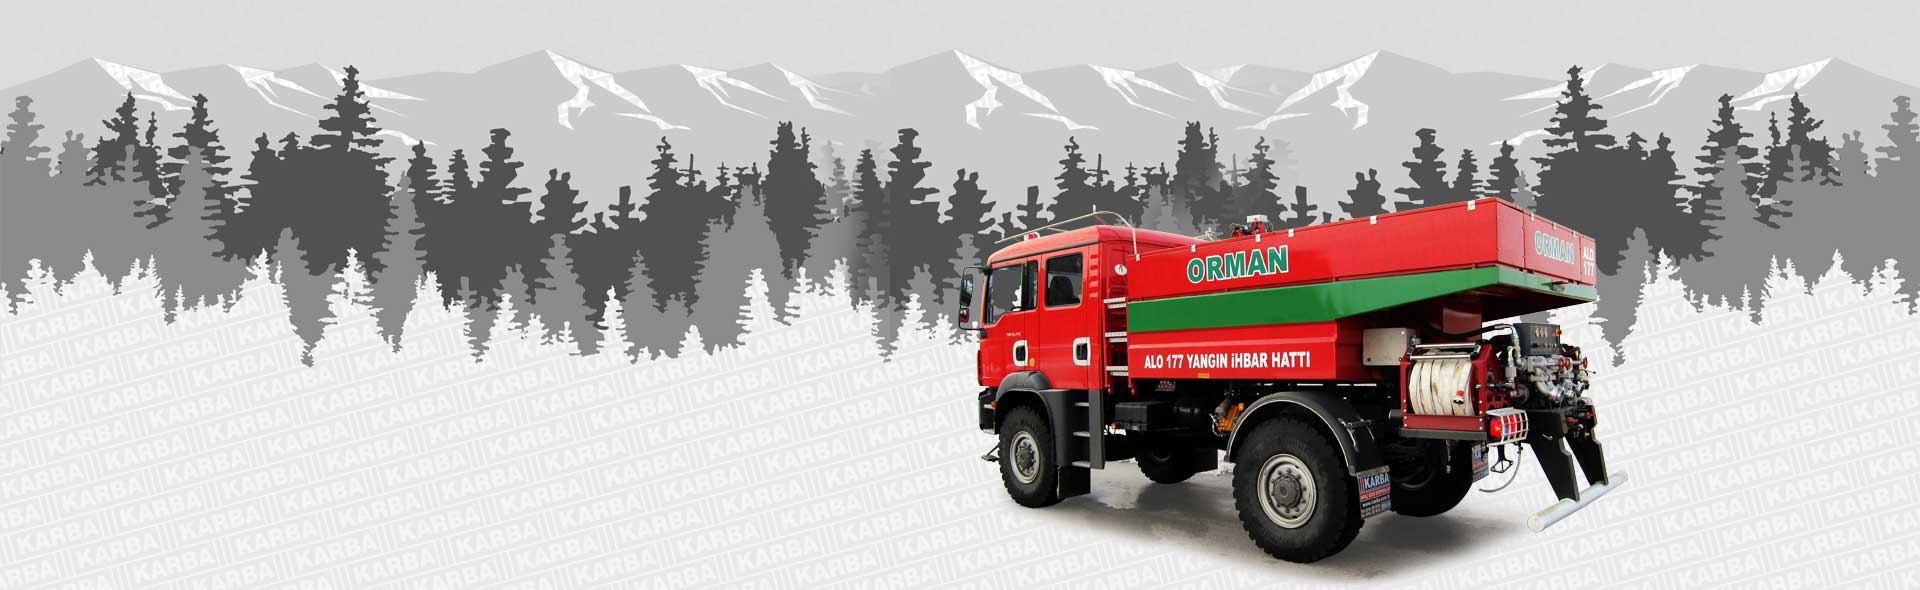 Forest Firefighting Vehicles